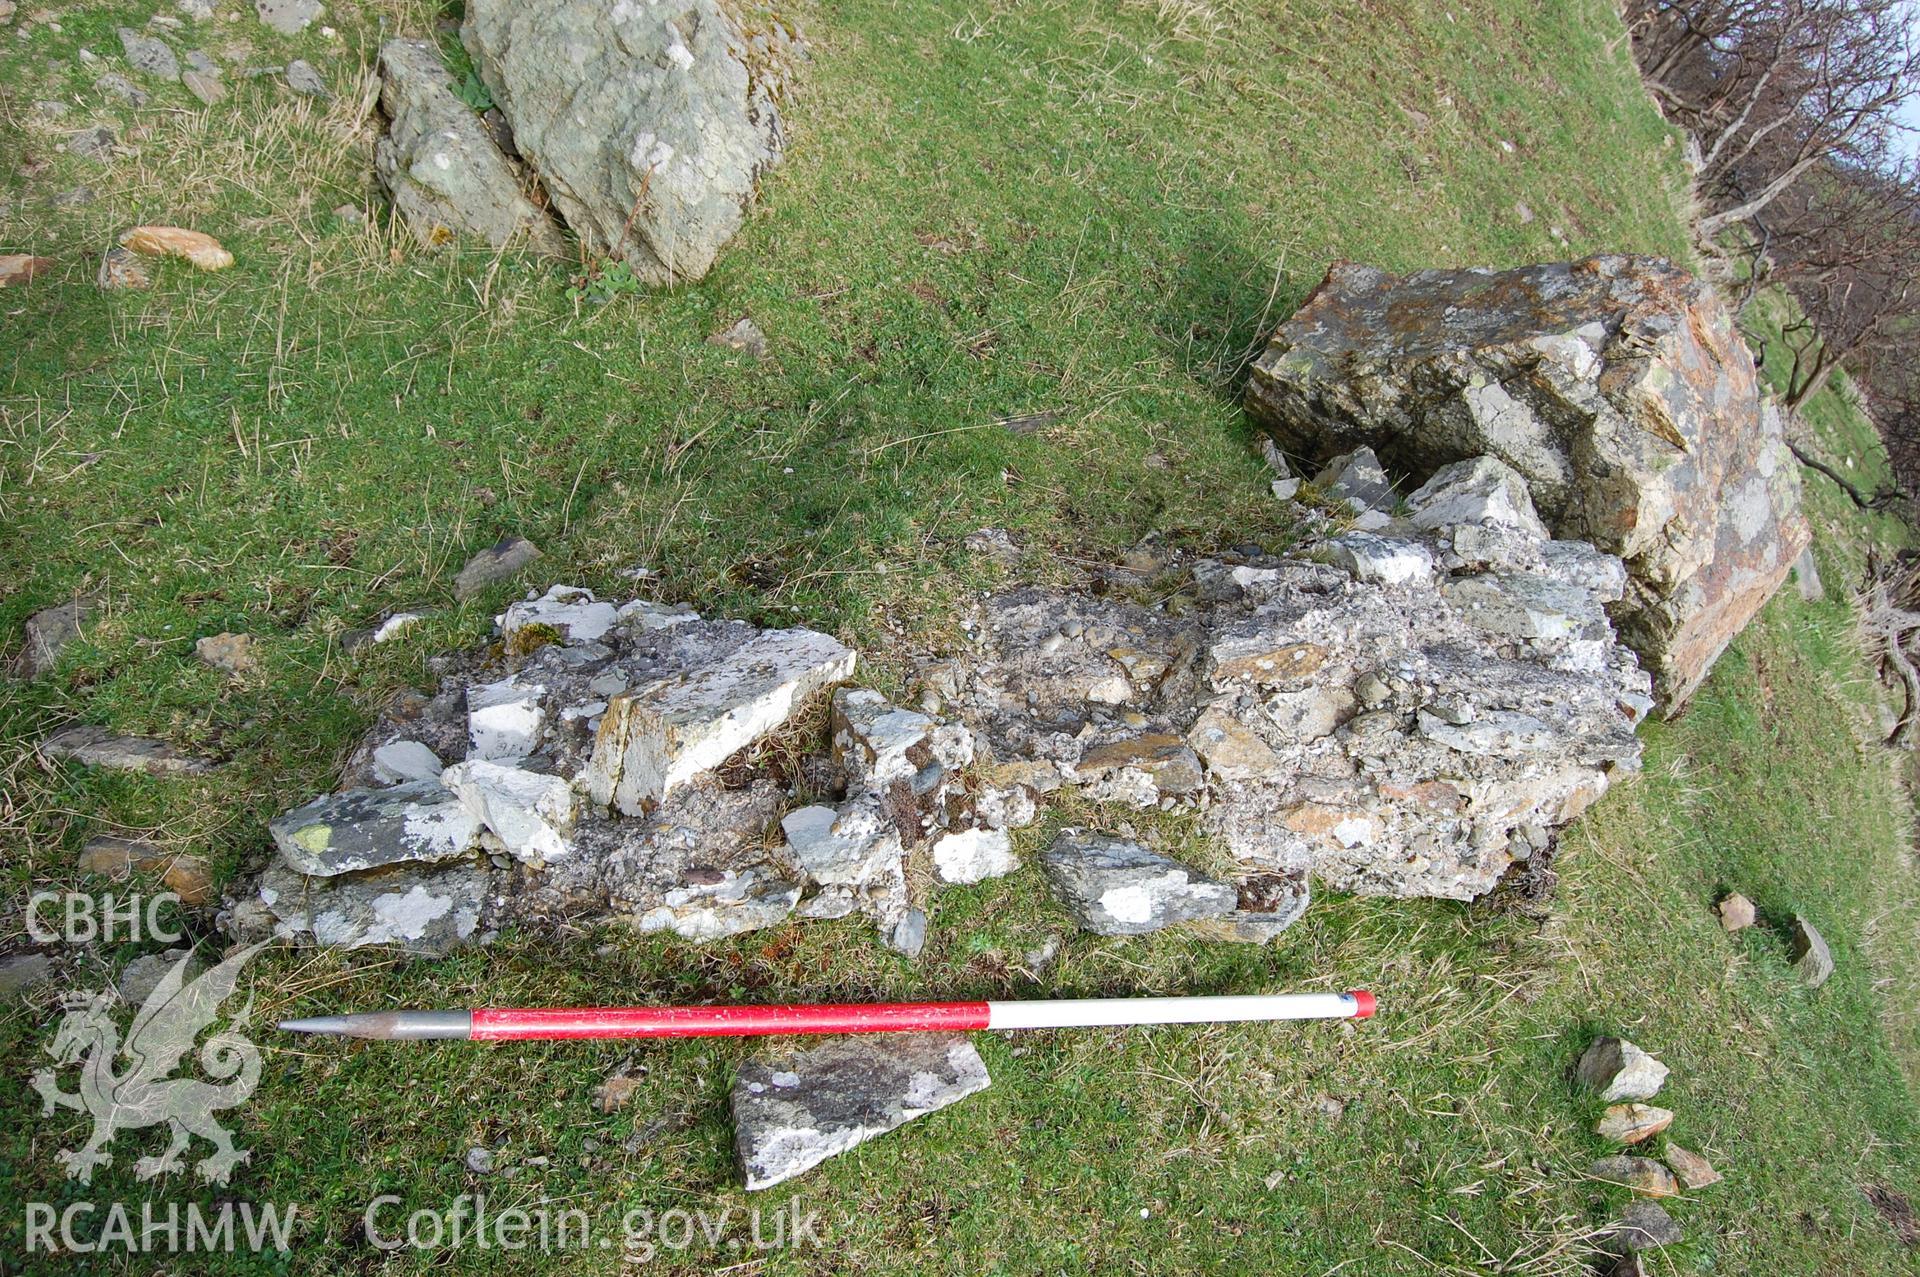 Digital photograph from an archaeological assessment of Deganwy Castle, carried out by Gwynedd Archaeological Trust, 2009. Fallen masonry in quarry below cliff on South side of donjon.